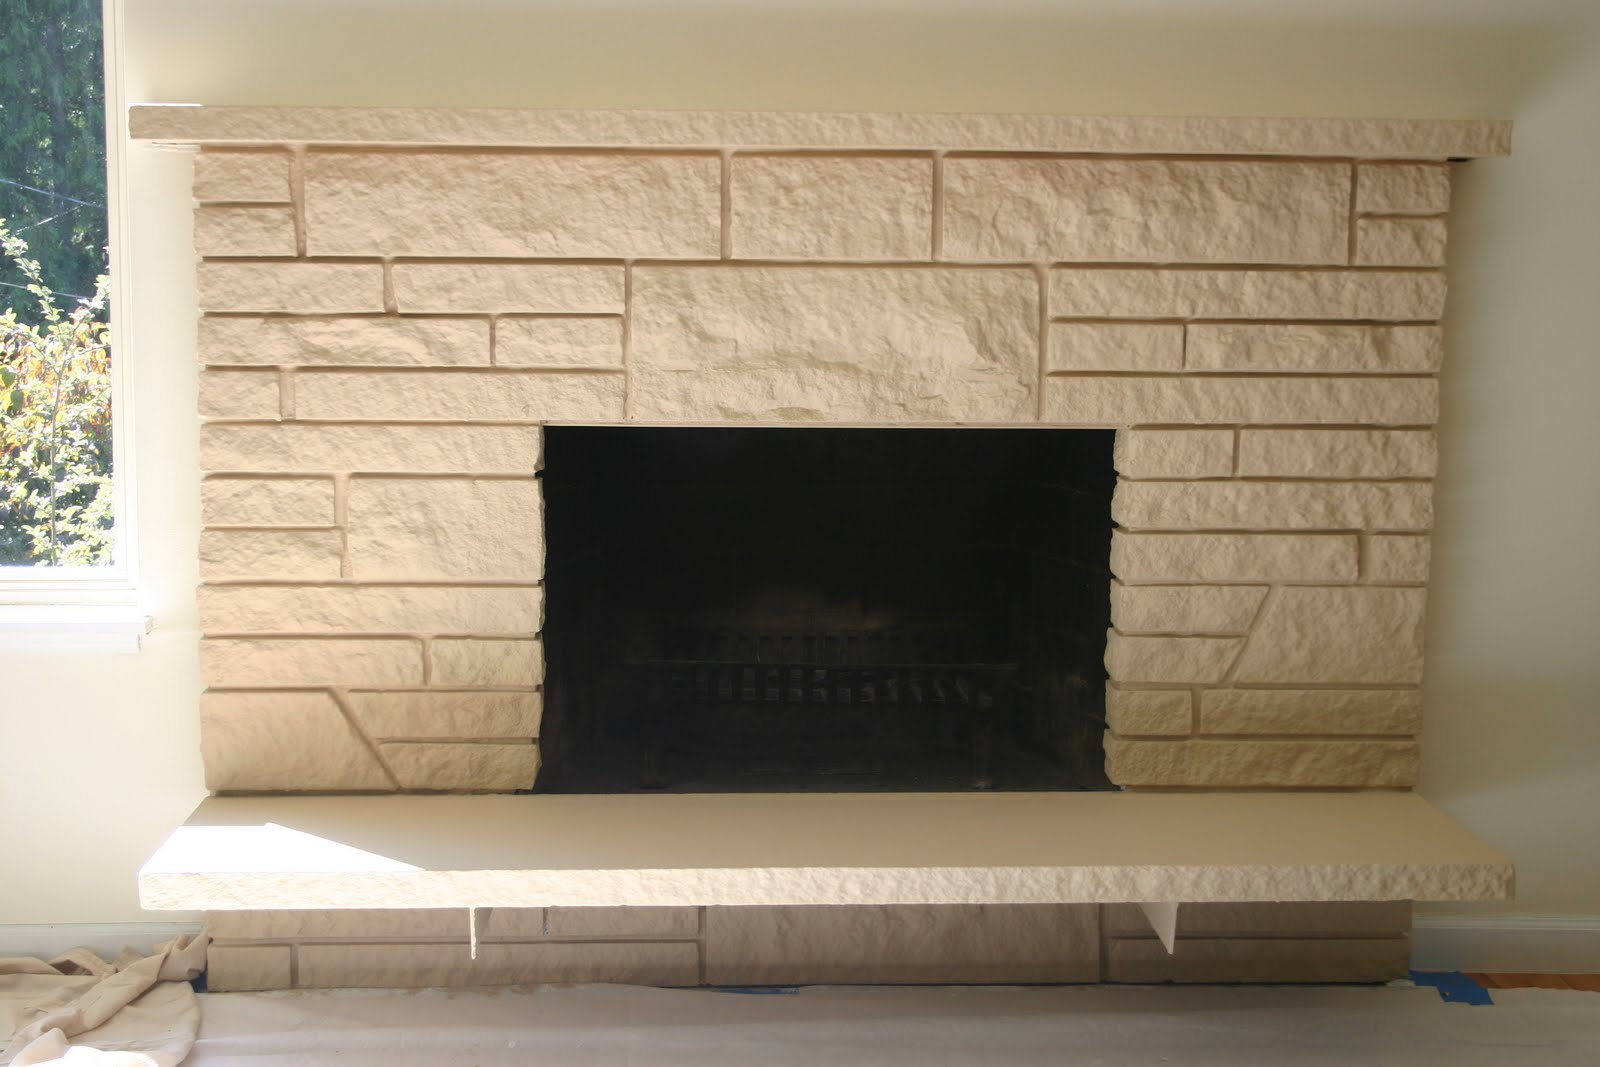 Redo Fireplace with Stone Awesome Paint Stone Fireplace Charming Fireplace